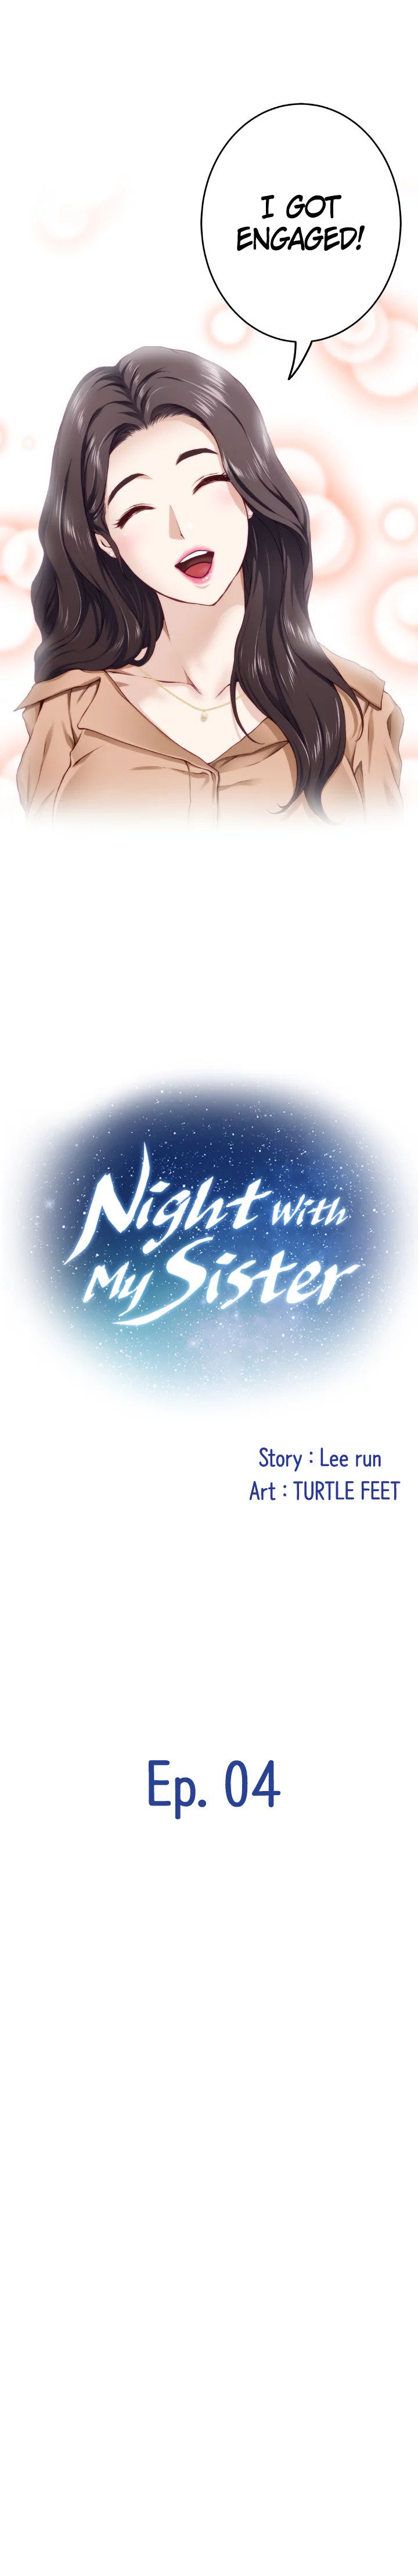 night-with-my-sister-chap-4-2